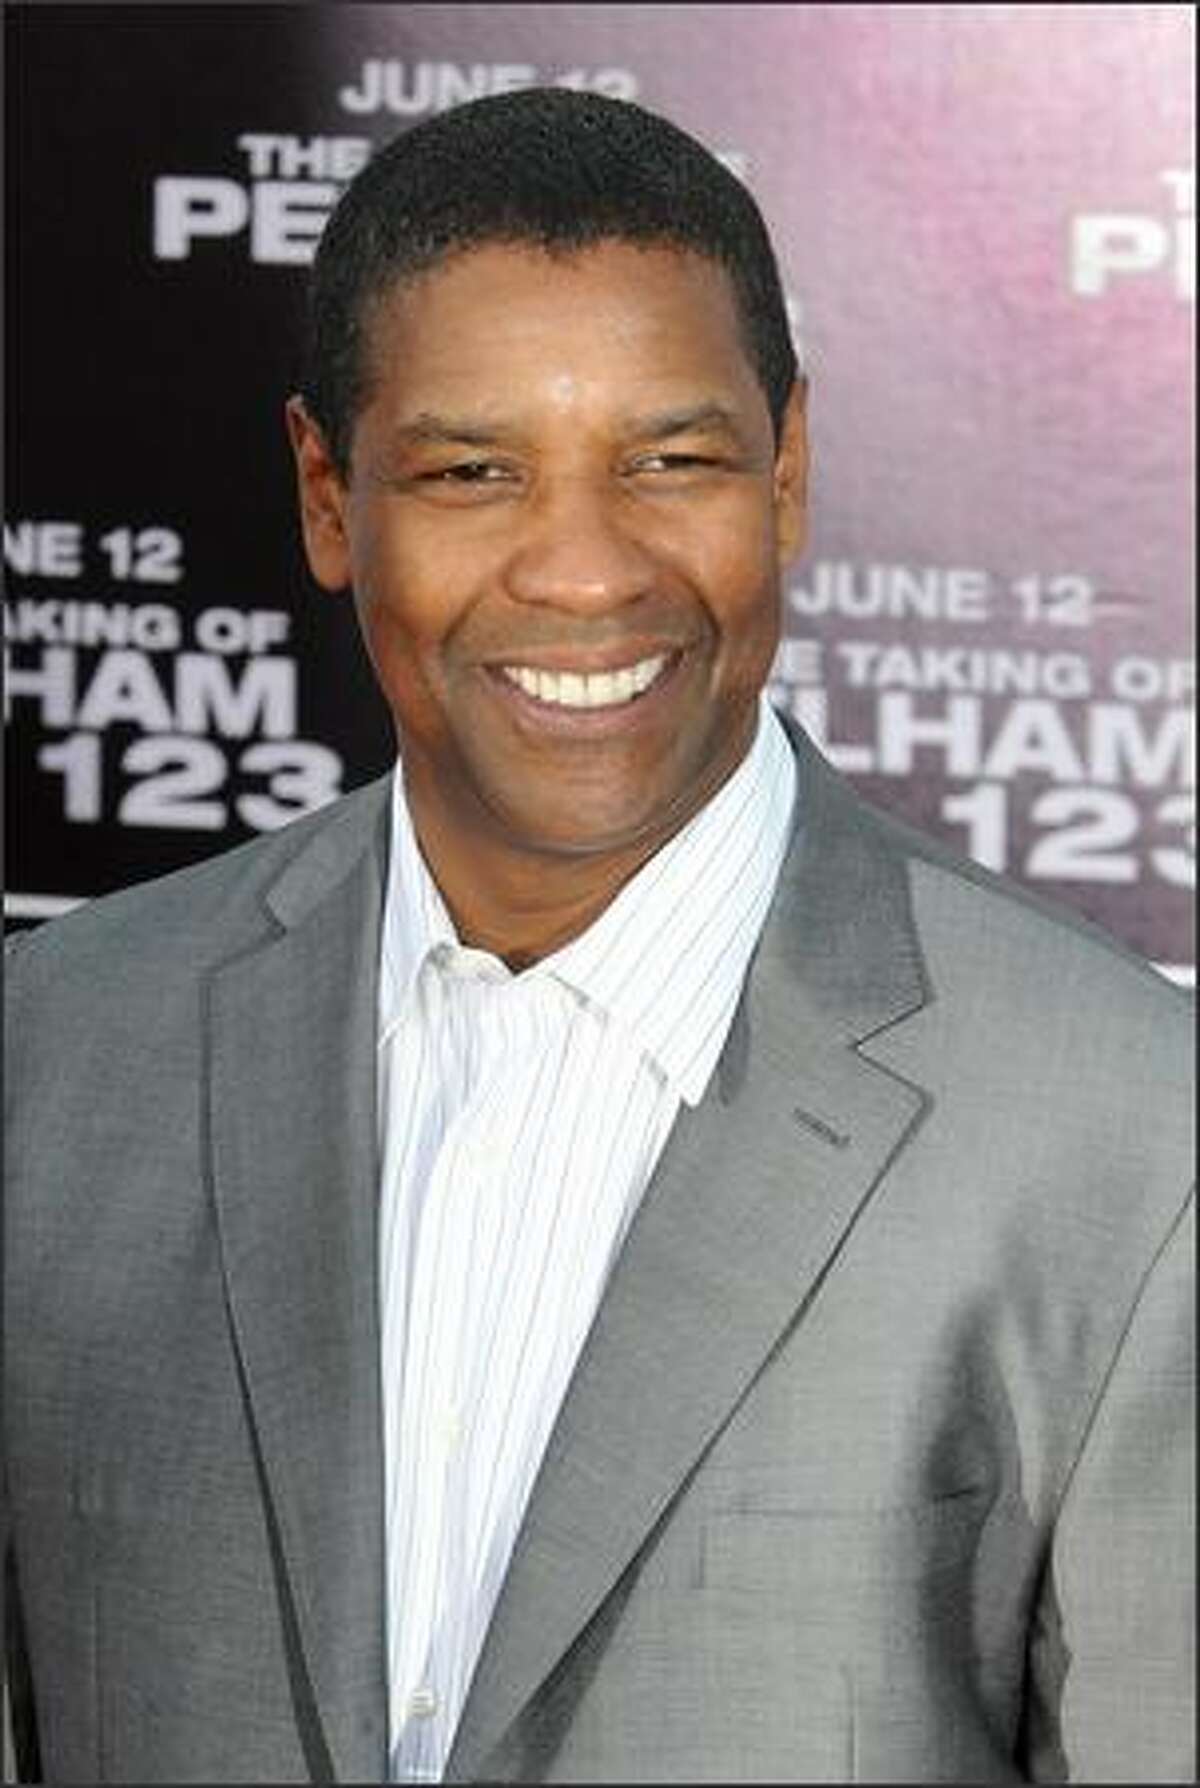 Cast member Denzel Washington arrives for the premiere of "The Taking of Pelham 123" on Wednesday night in Los Angeles.